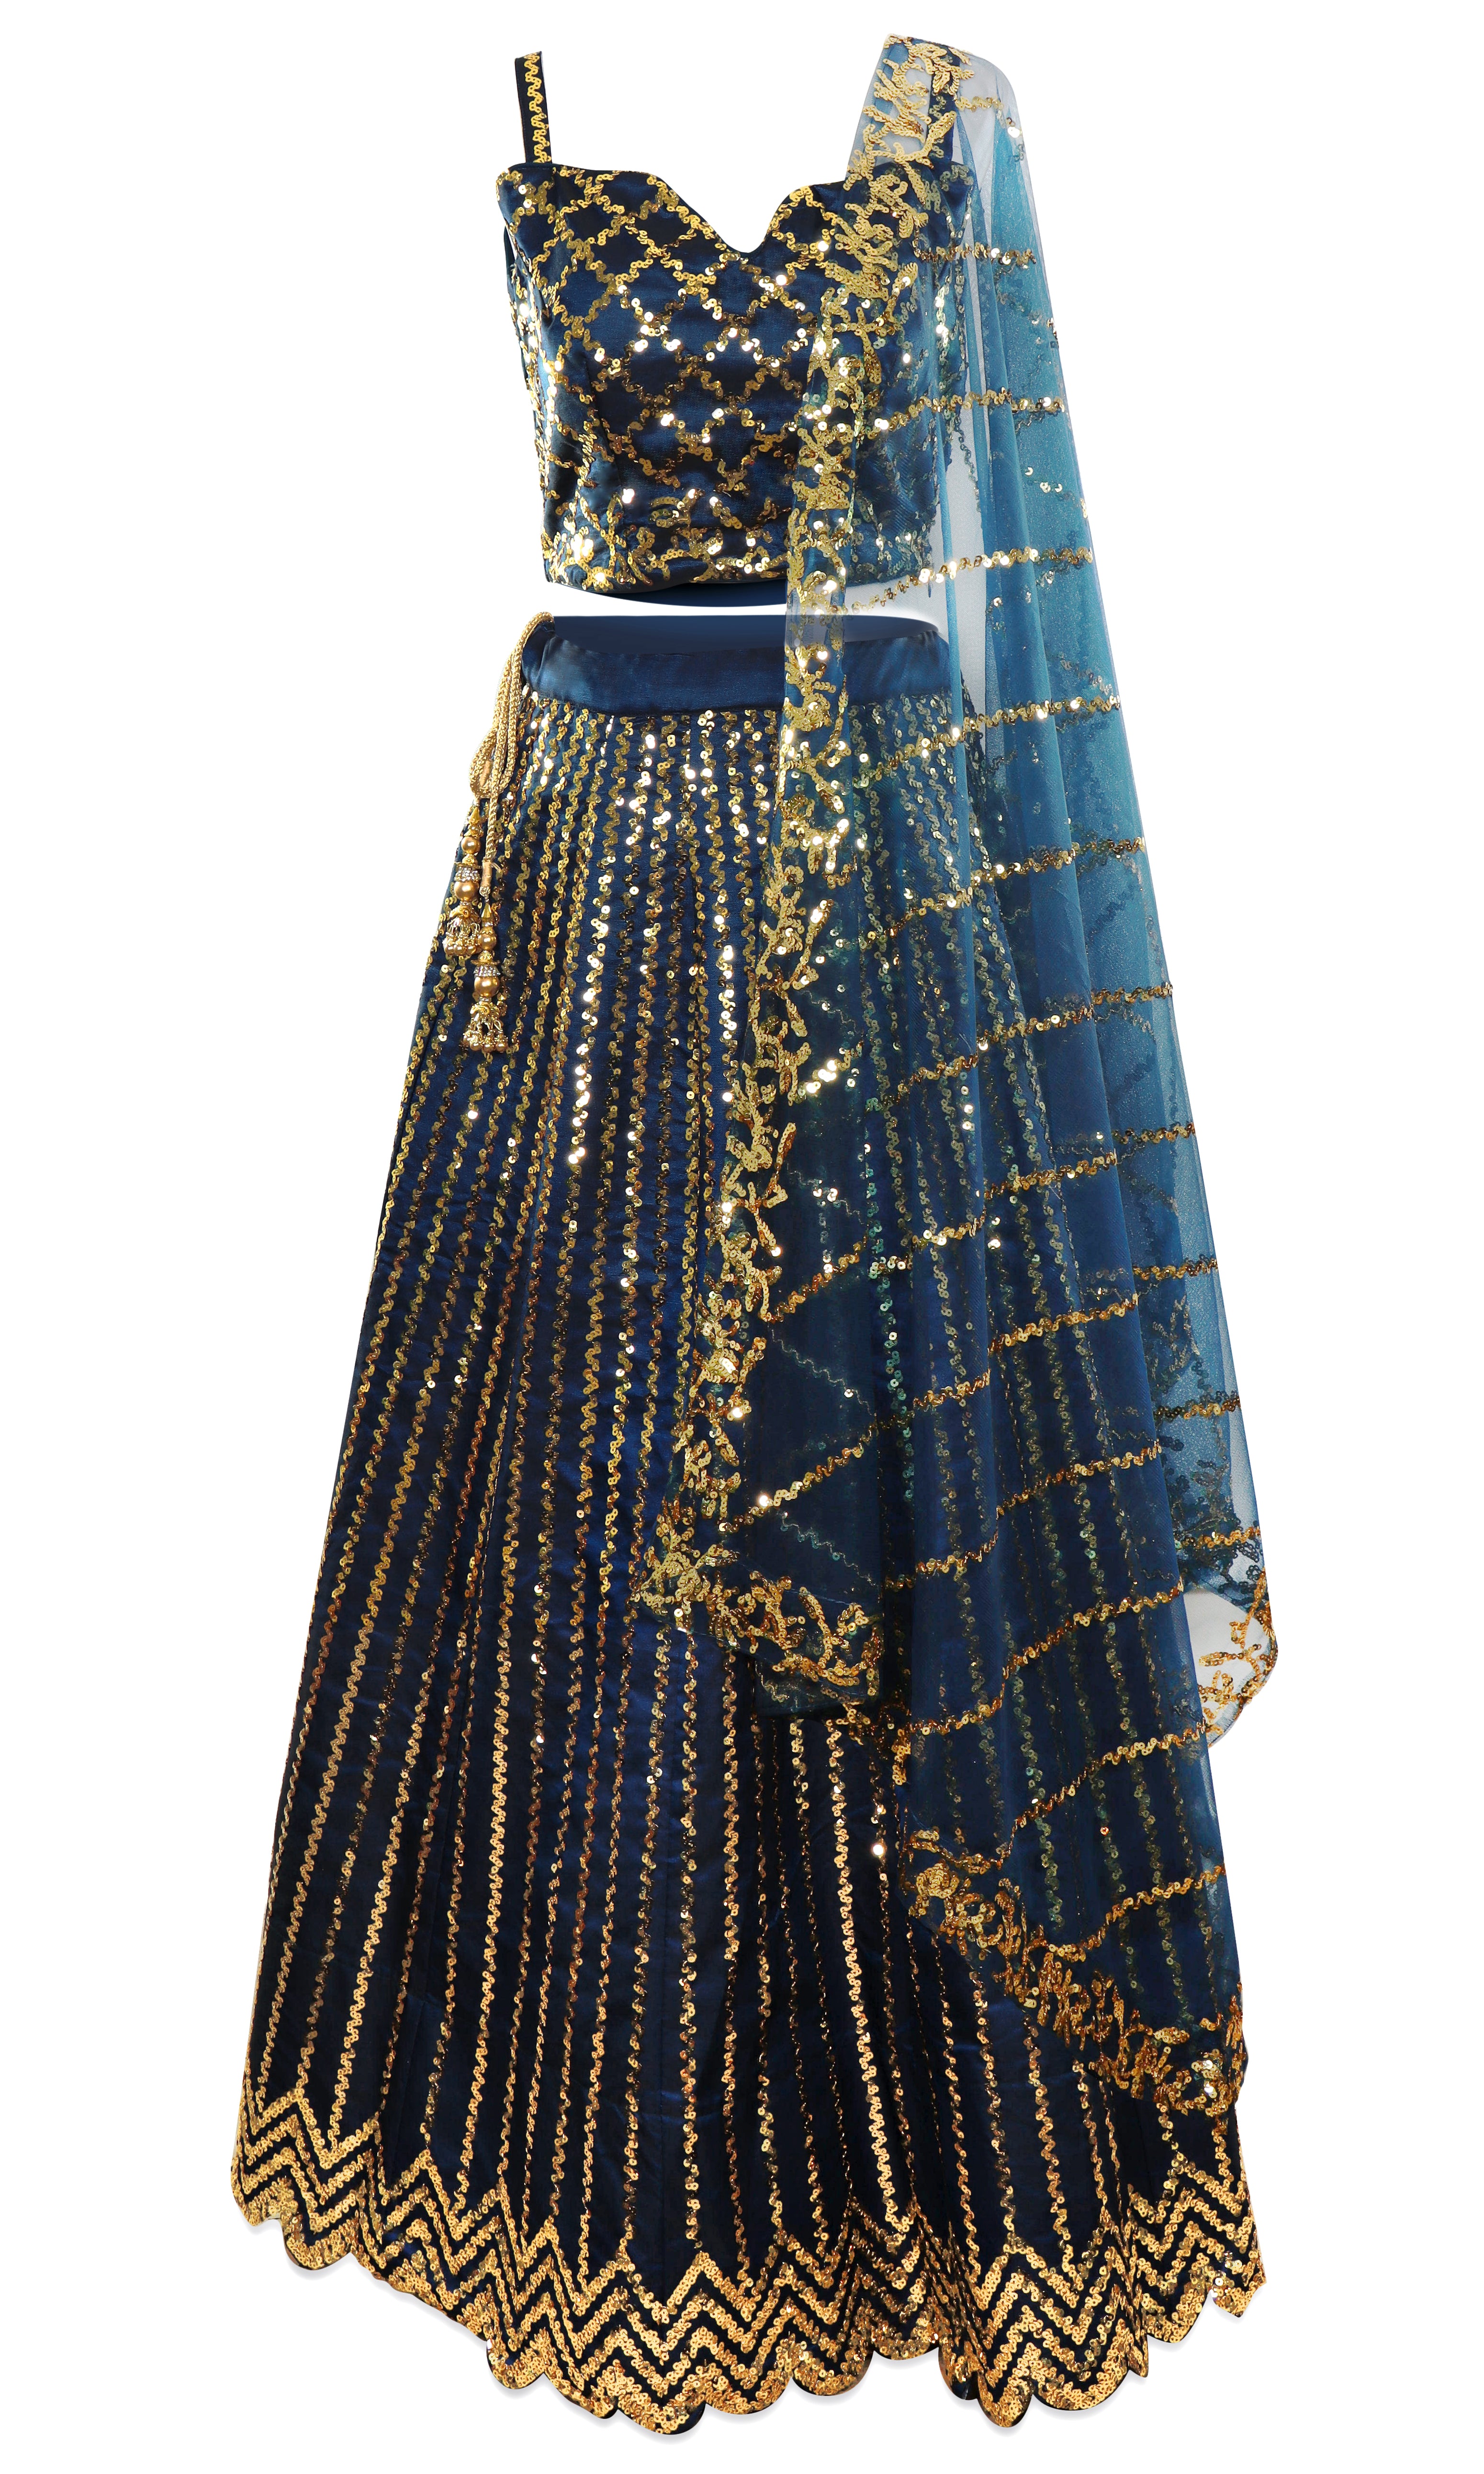 Blue gold lehenga this beautiful 3 piece lehenga is navy in color covered in gold sequins. You'll be shining through the night!